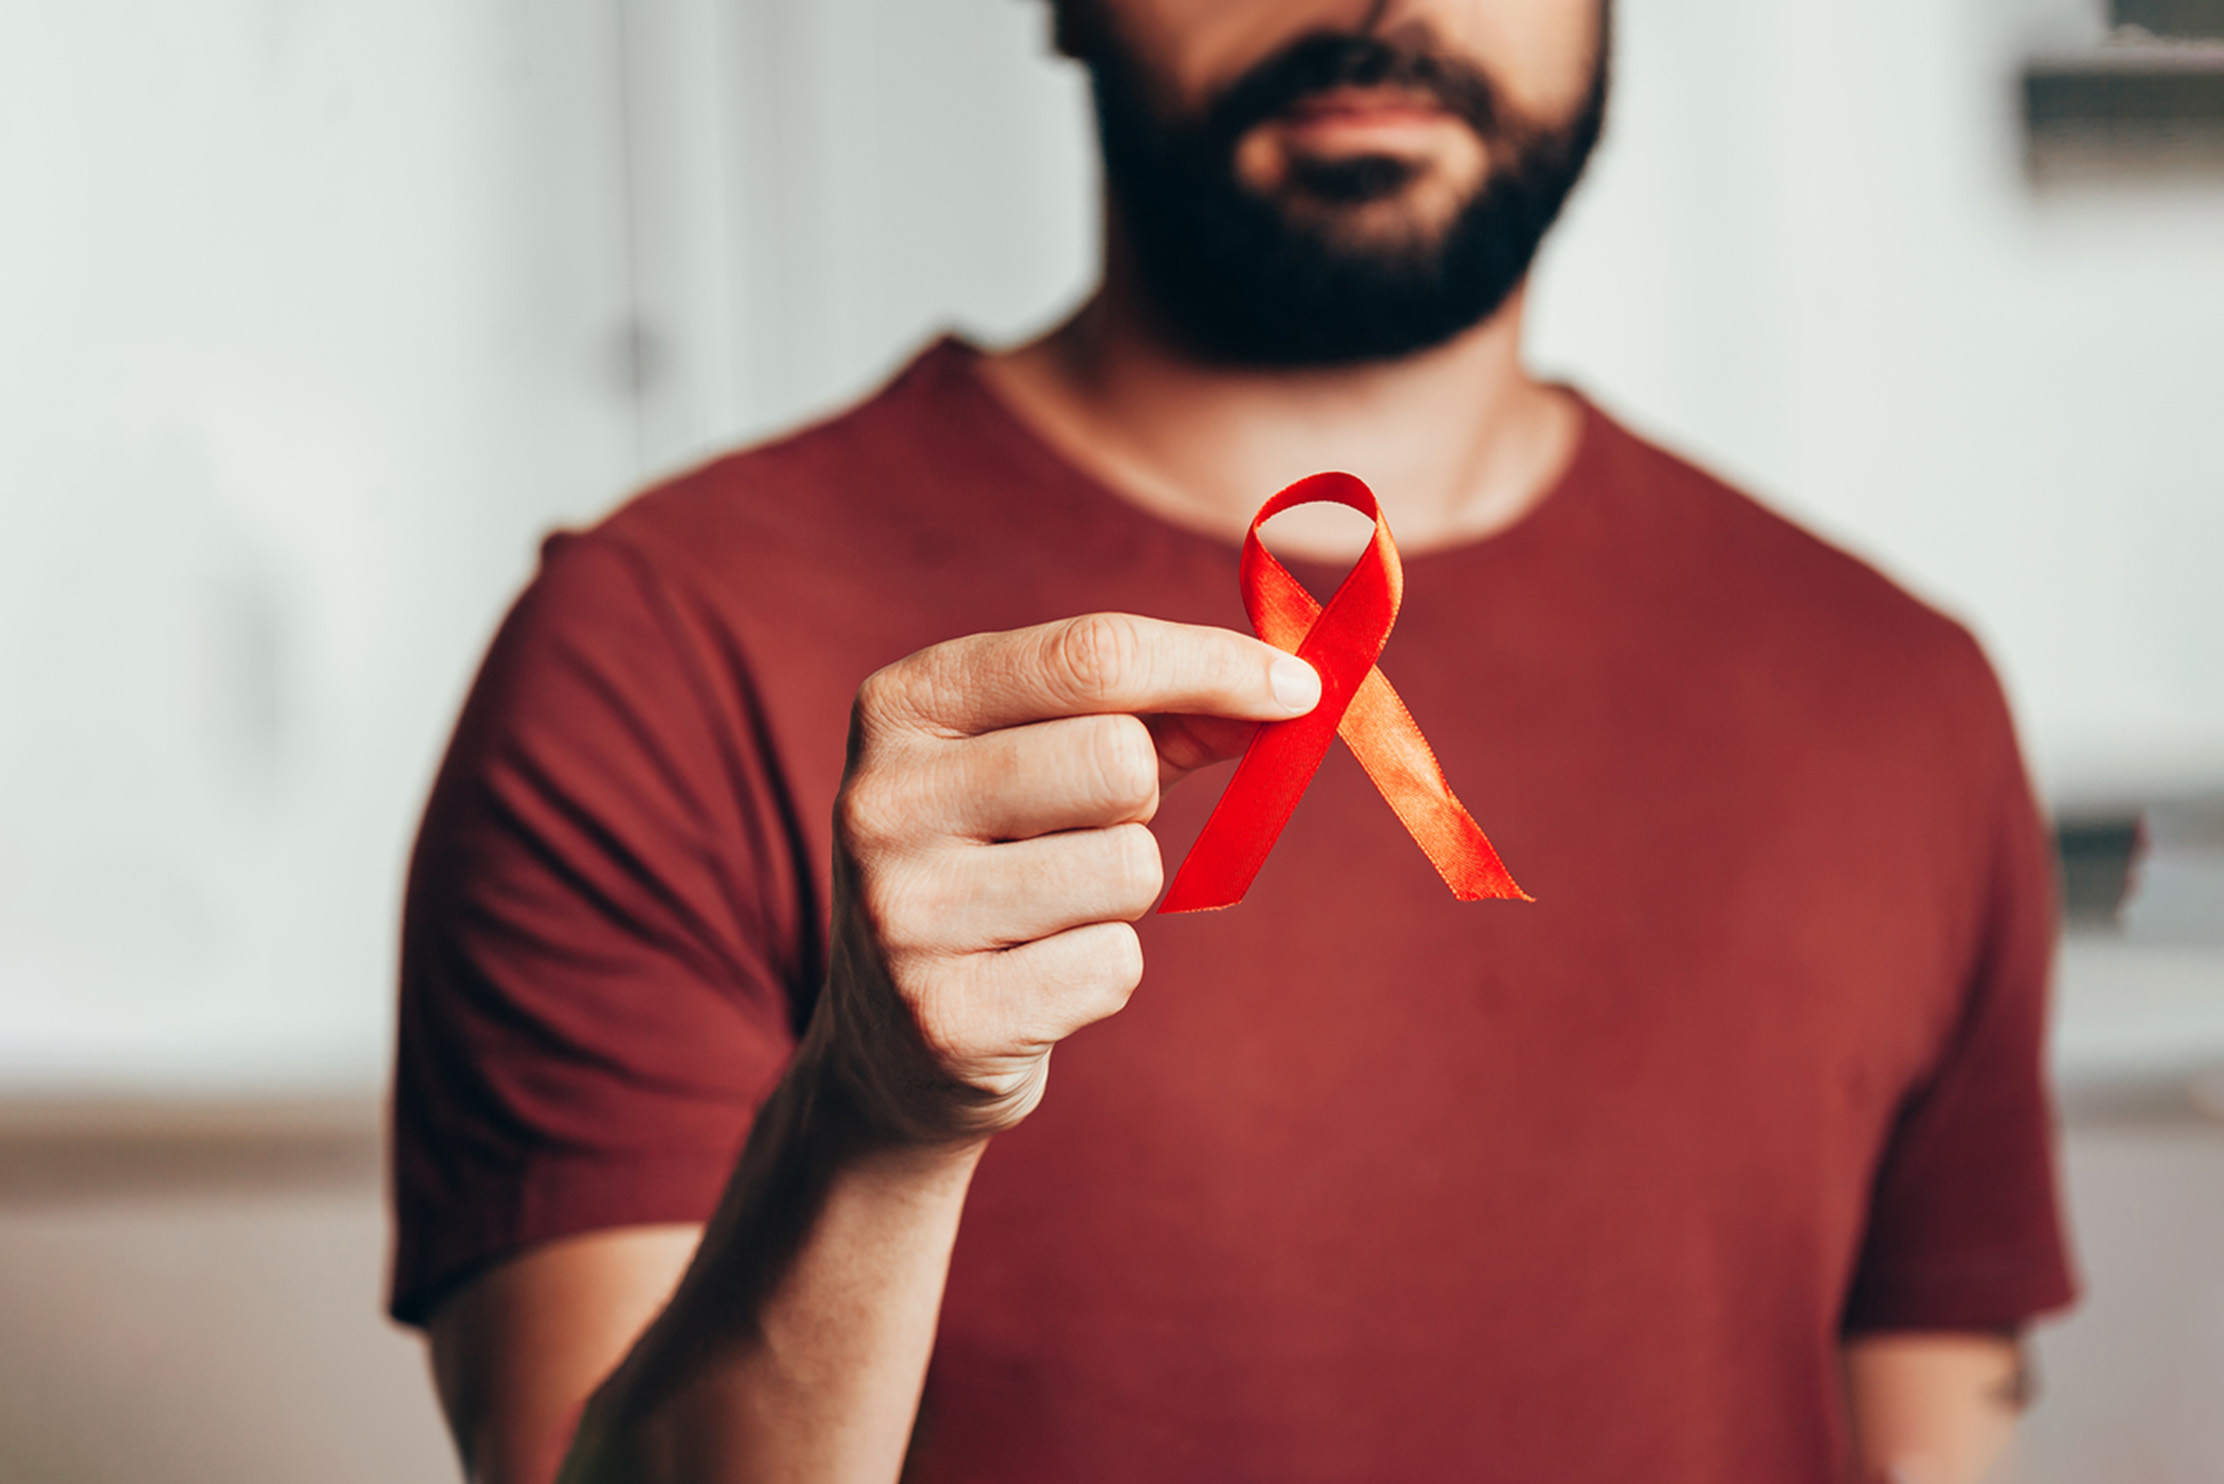 A bearded man in a red t-shirt holds a red AIDS ribbon